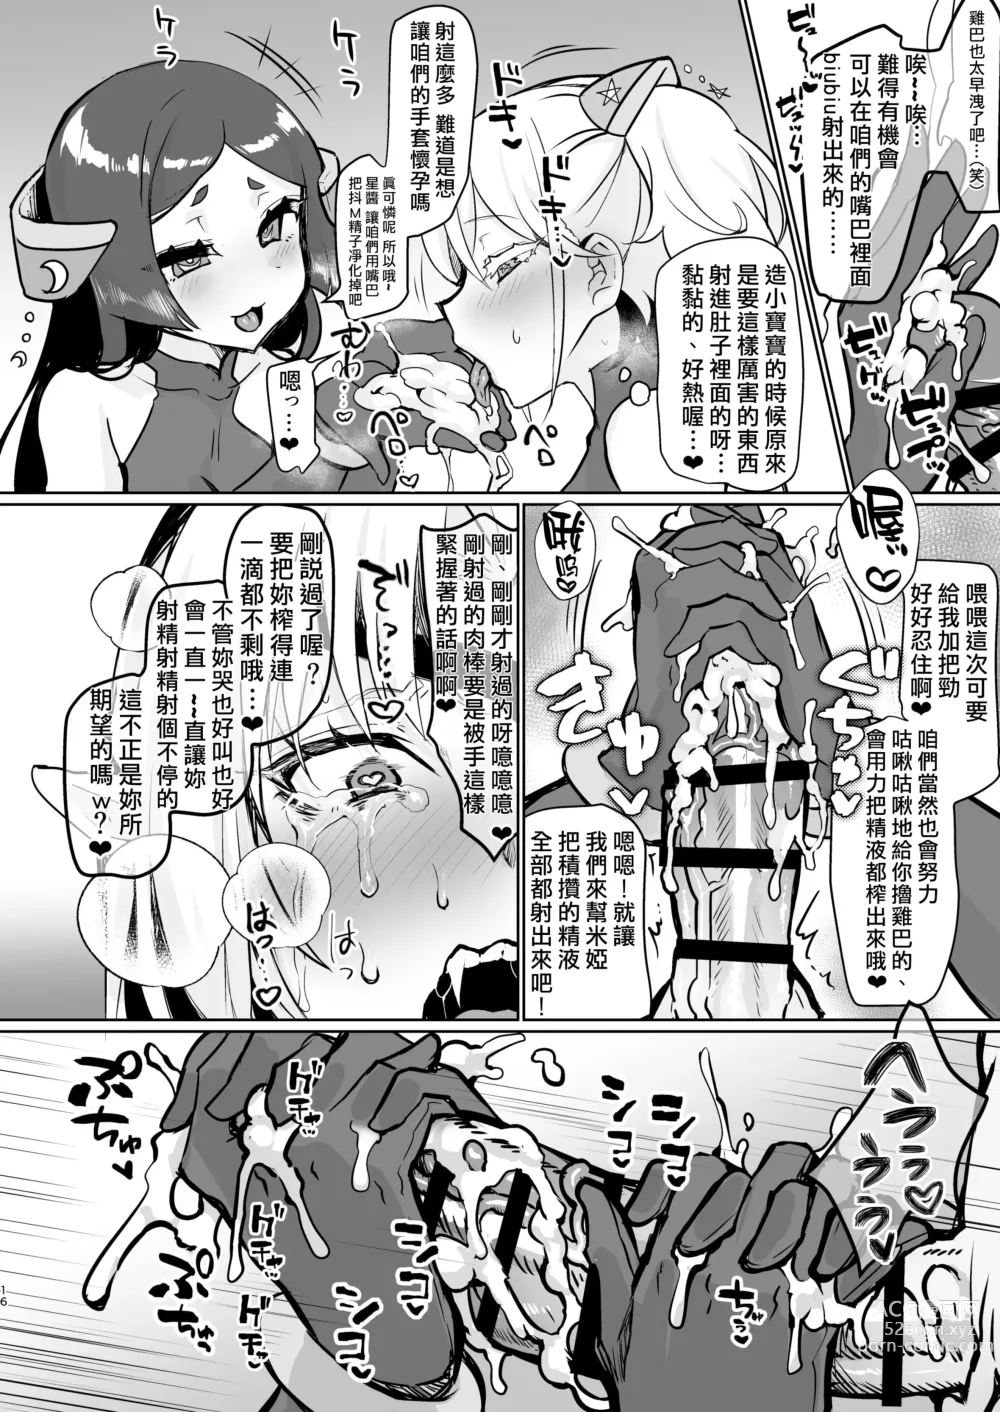 Page 16 of doujinshi 邪恶组织女干部正堕